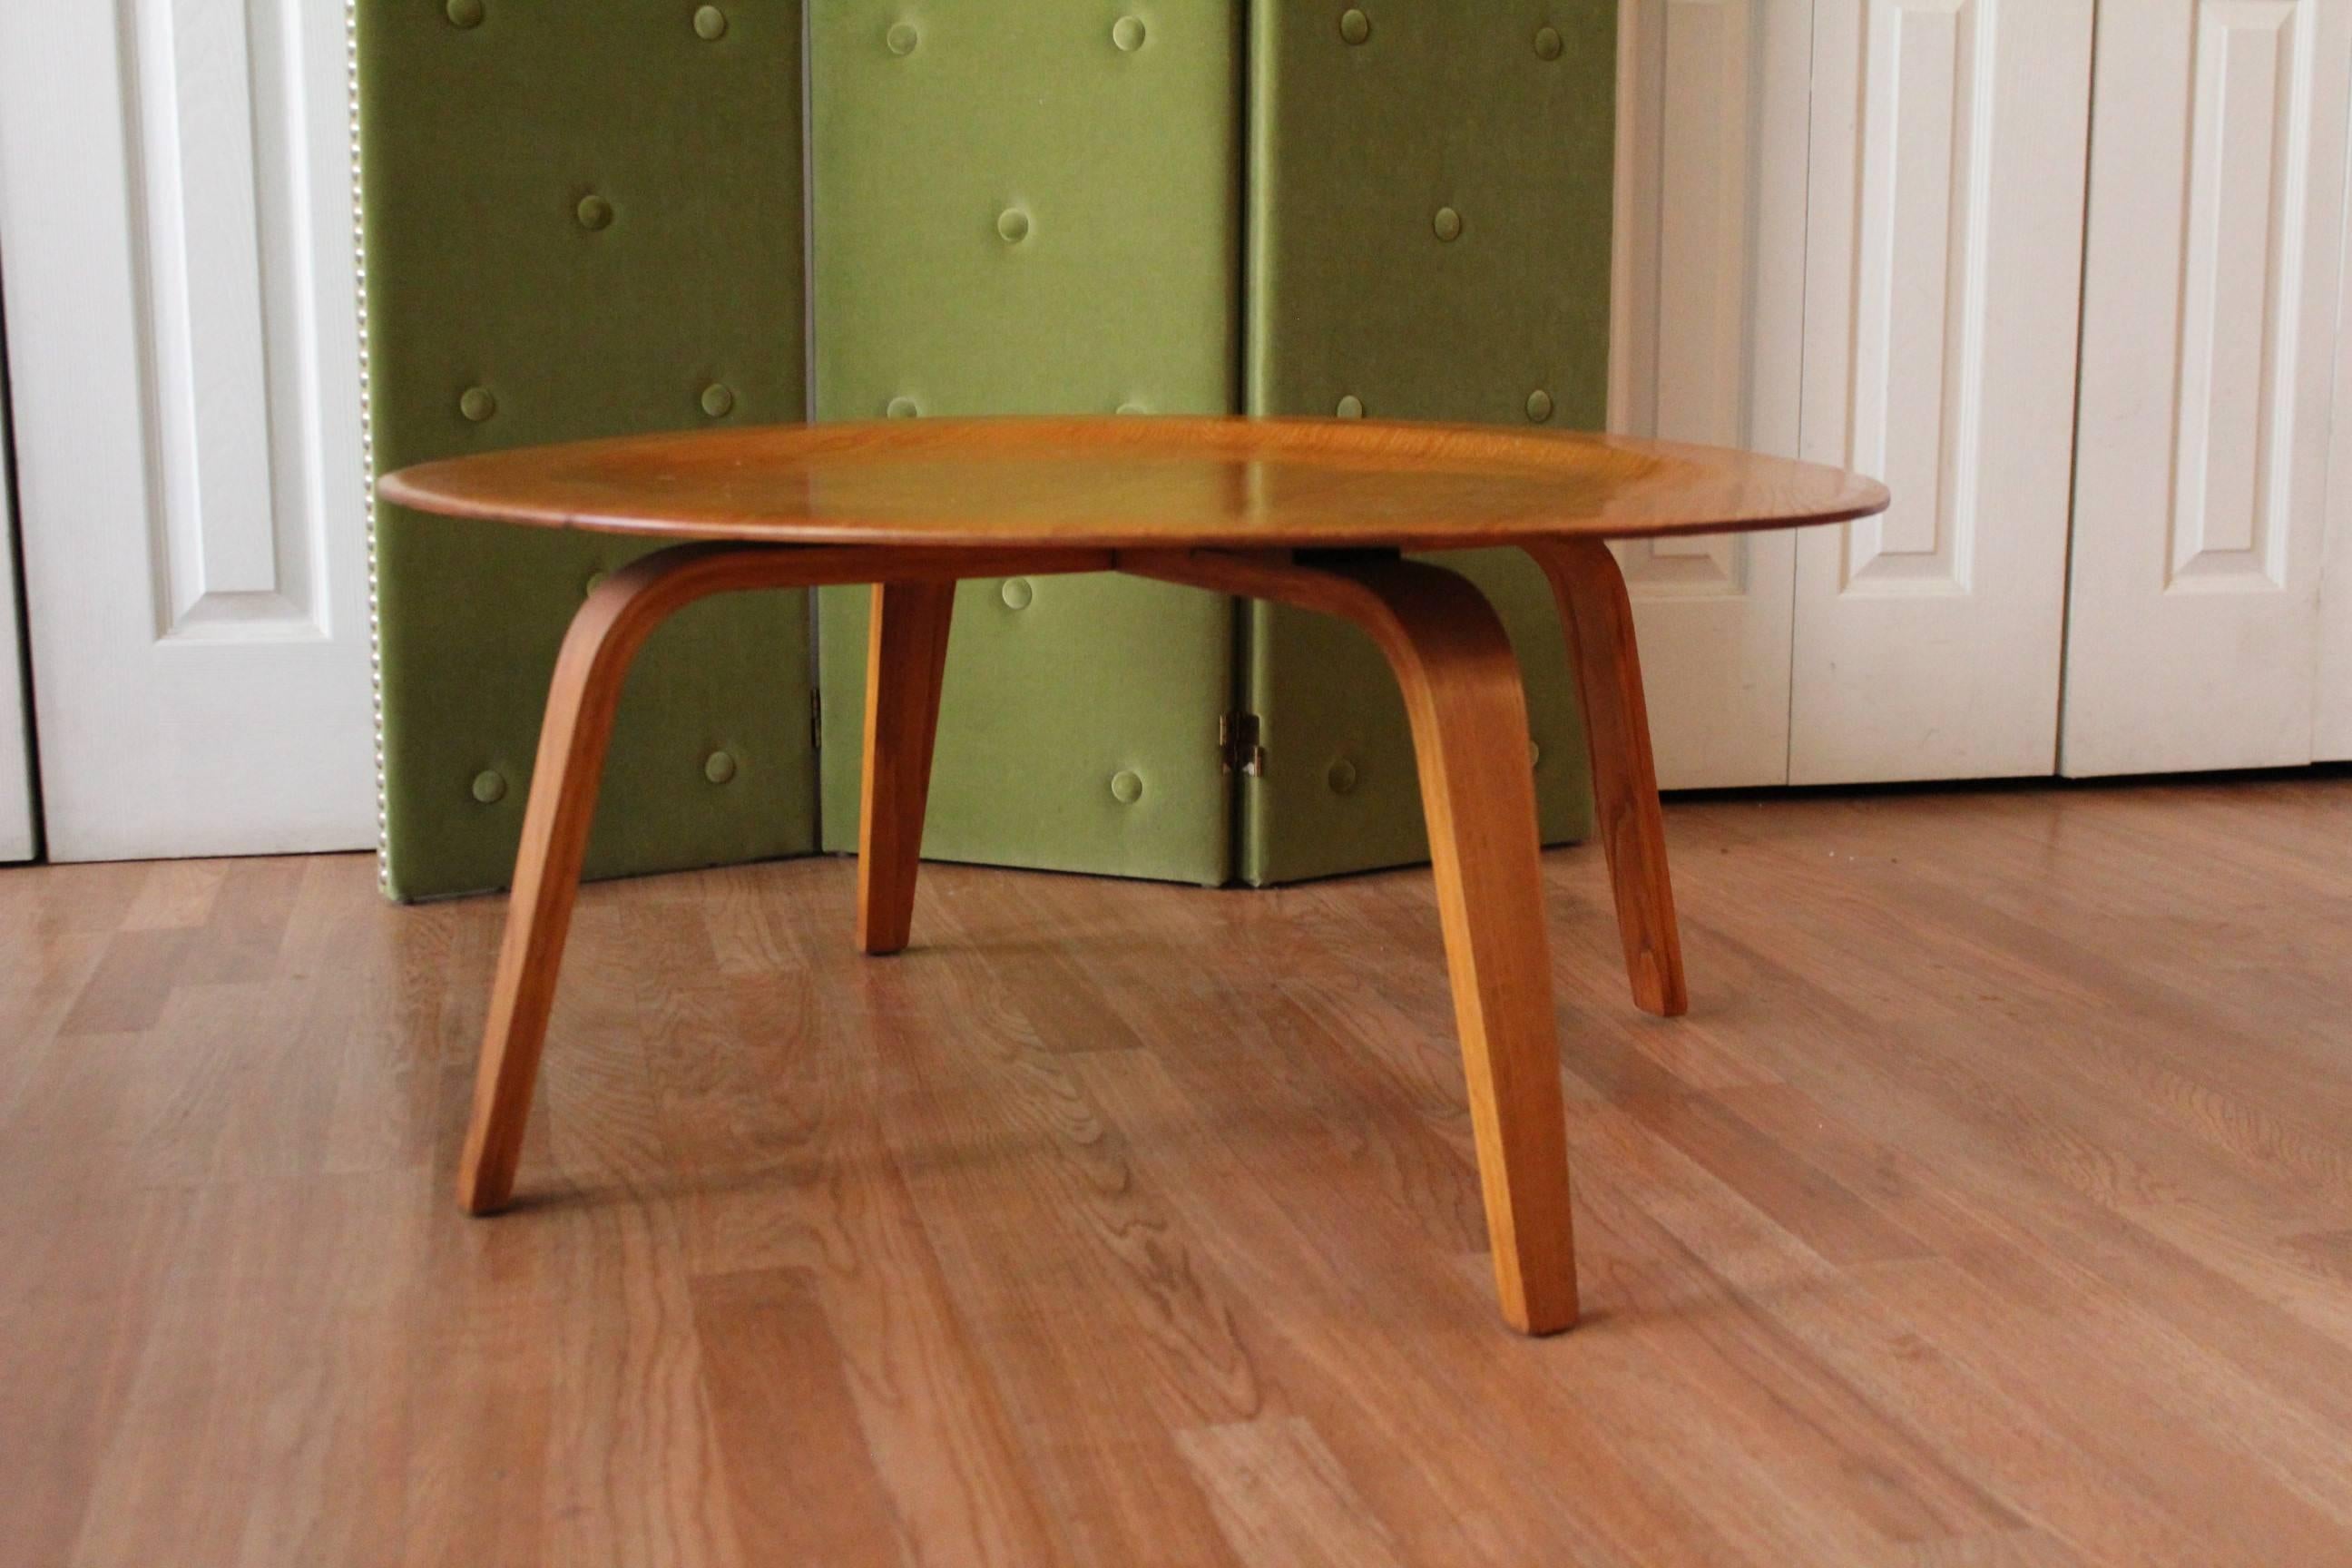 American Eames Charles and Ray Eames CTW ( Coffee Table Wood ) for Herman Miller